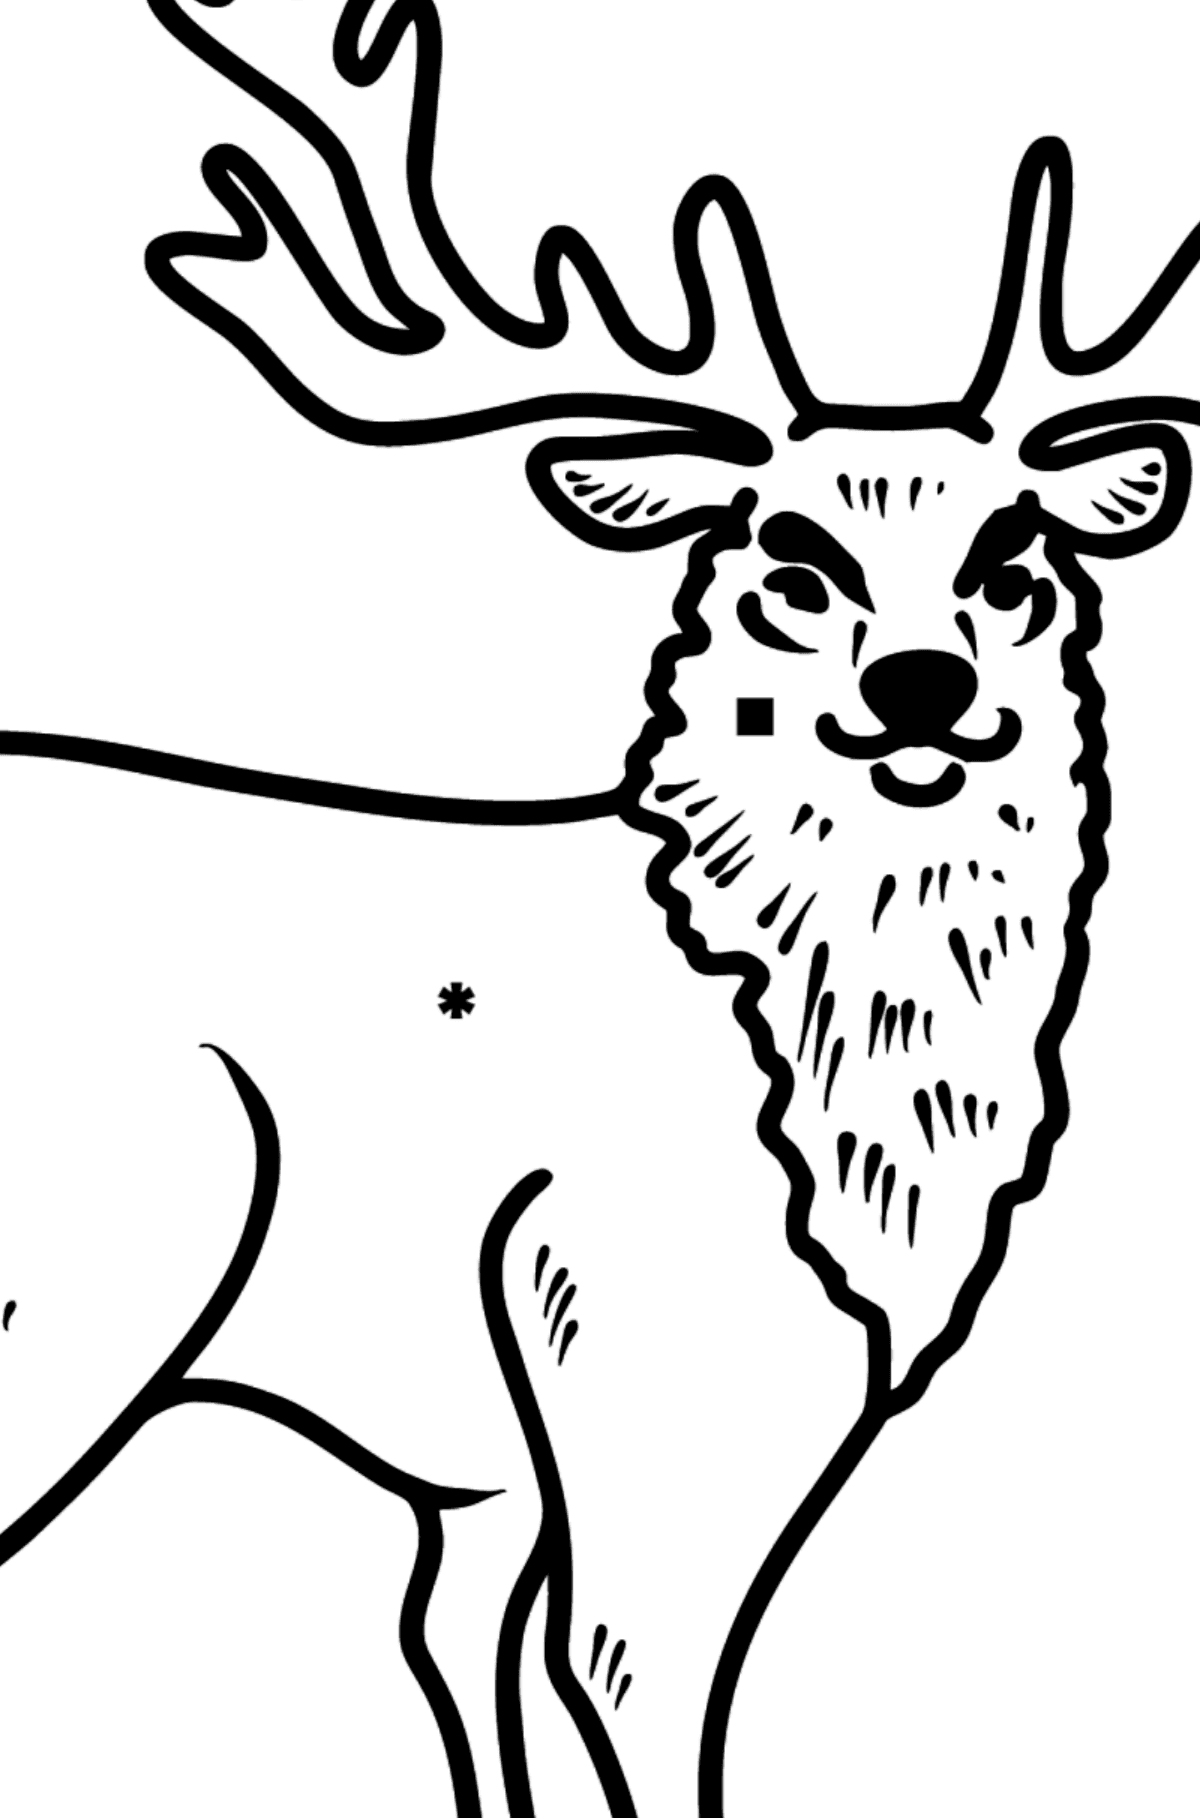 Deer coloring page - Coloring by Symbols for Kids